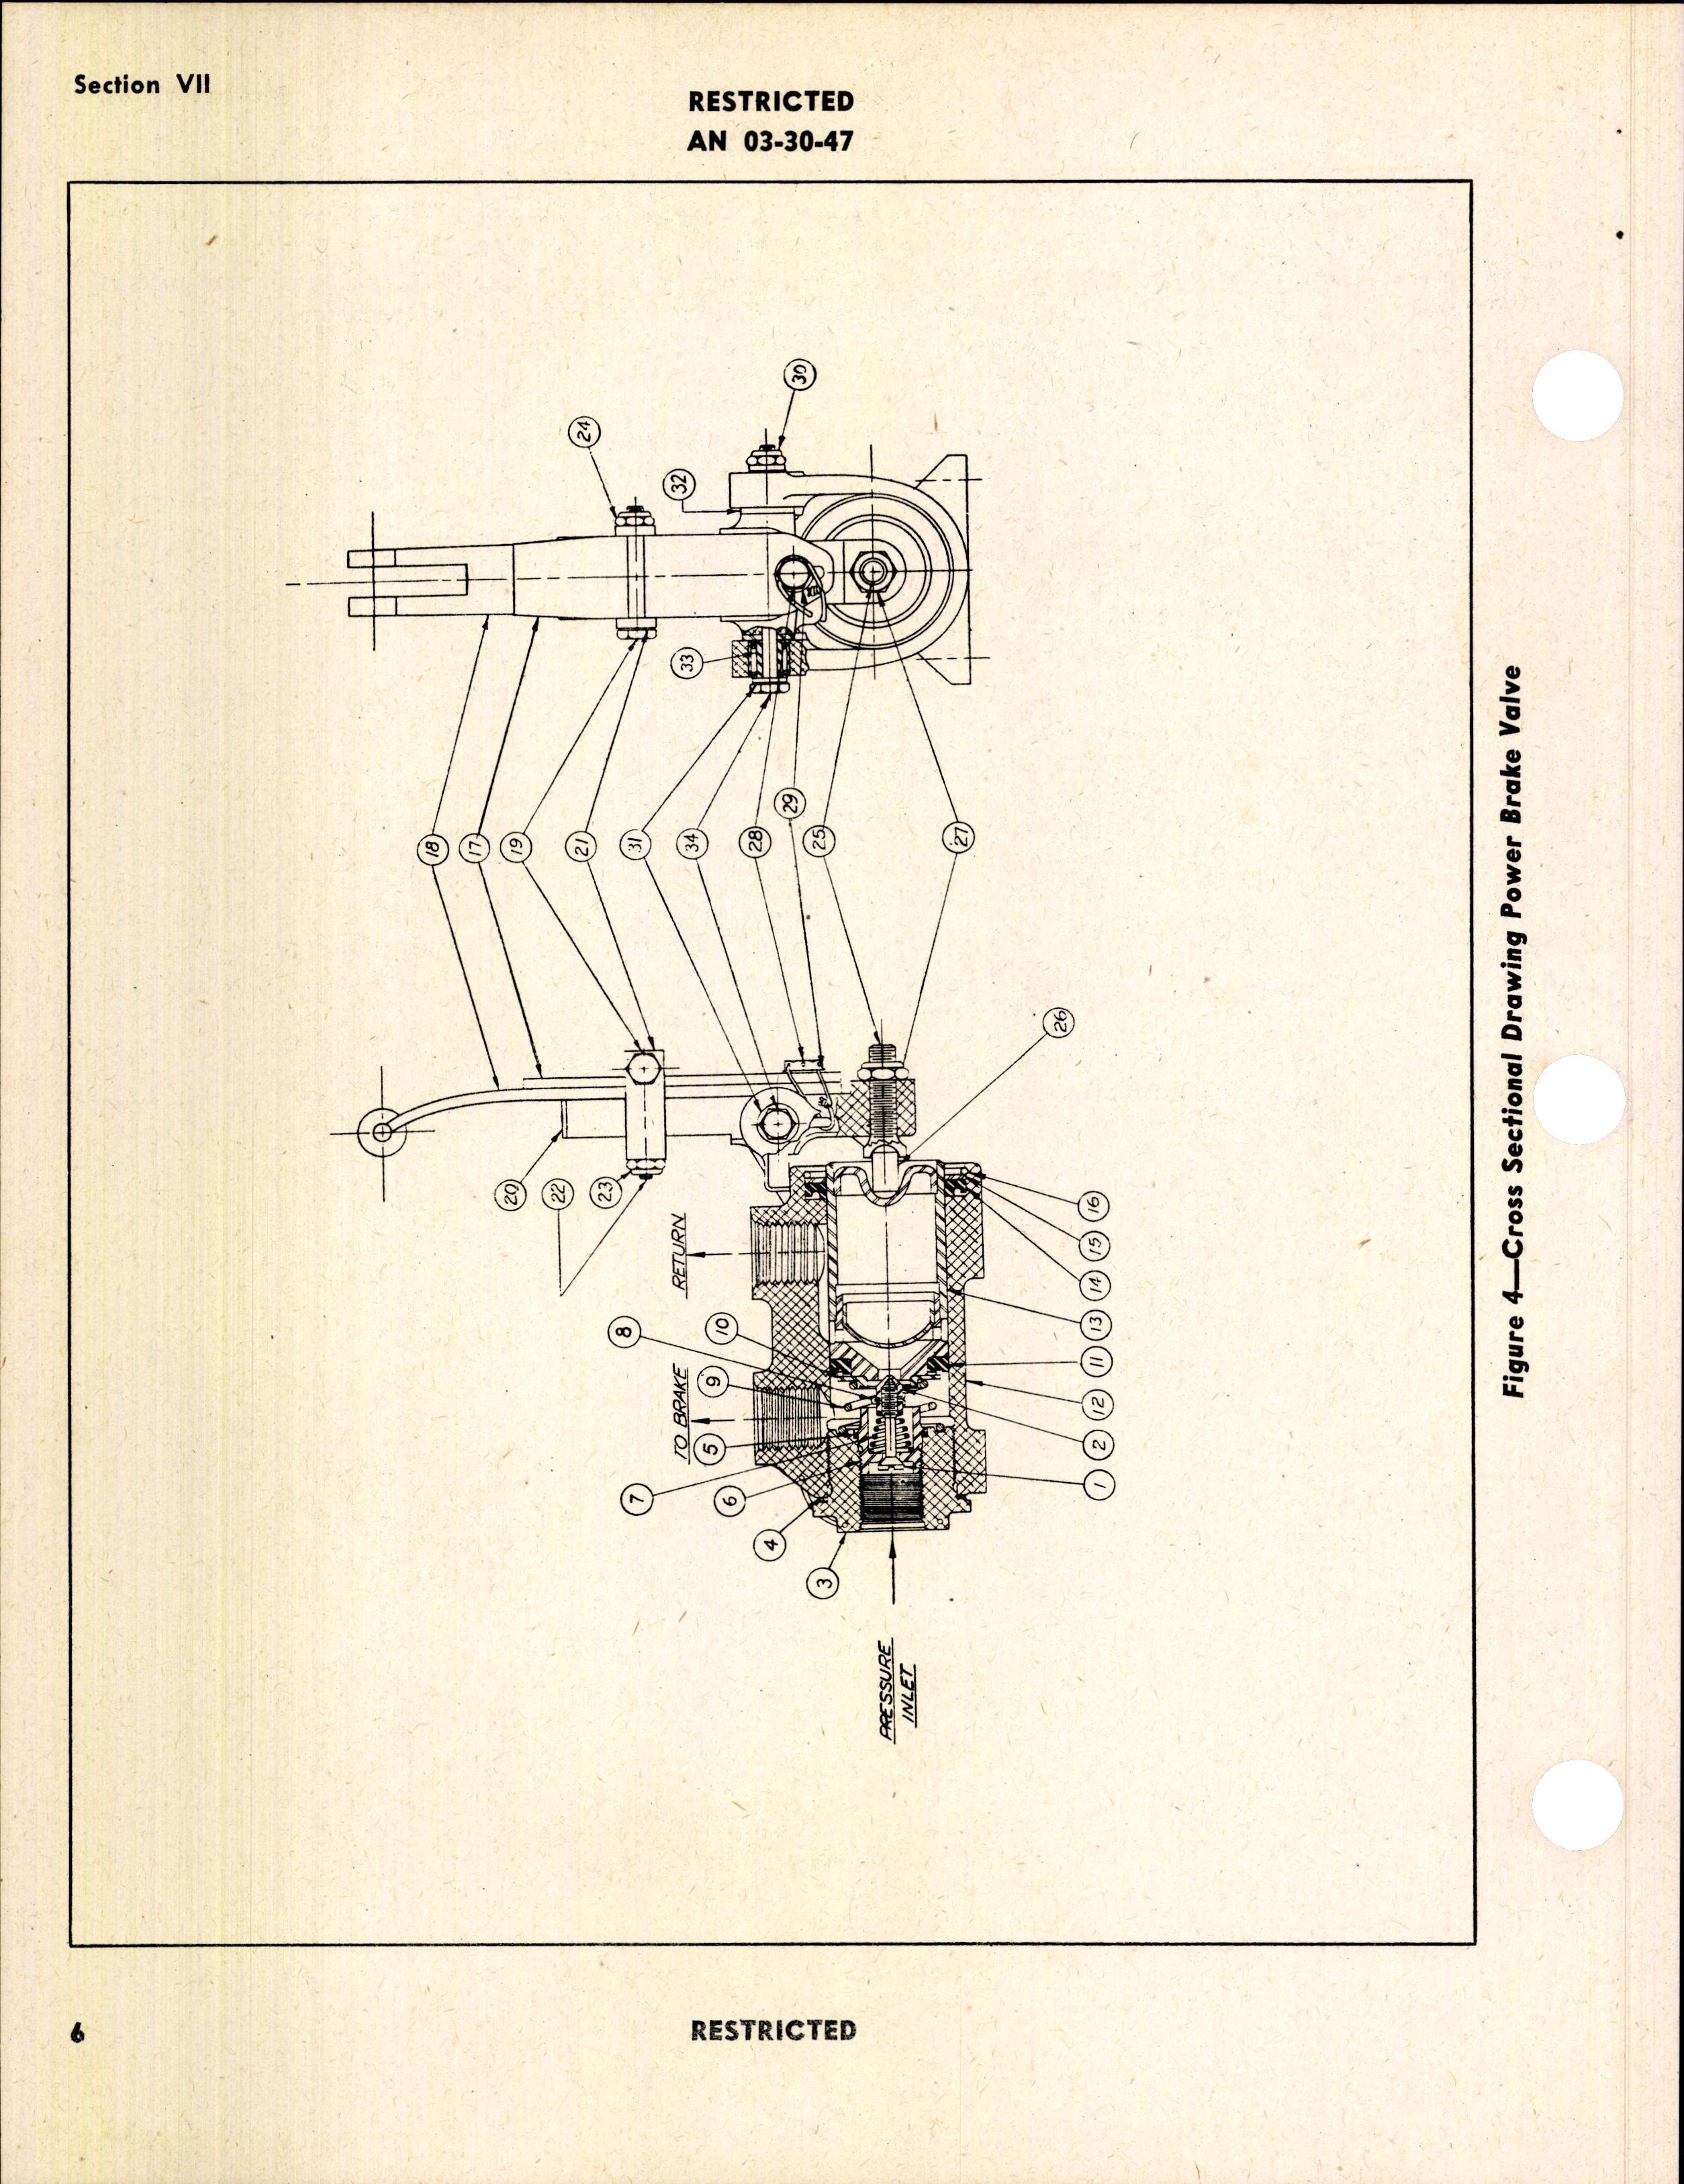 Sample page 10 from AirCorps Library document: Handbook of Instructions with Parts Catalog for Power Brake Valves